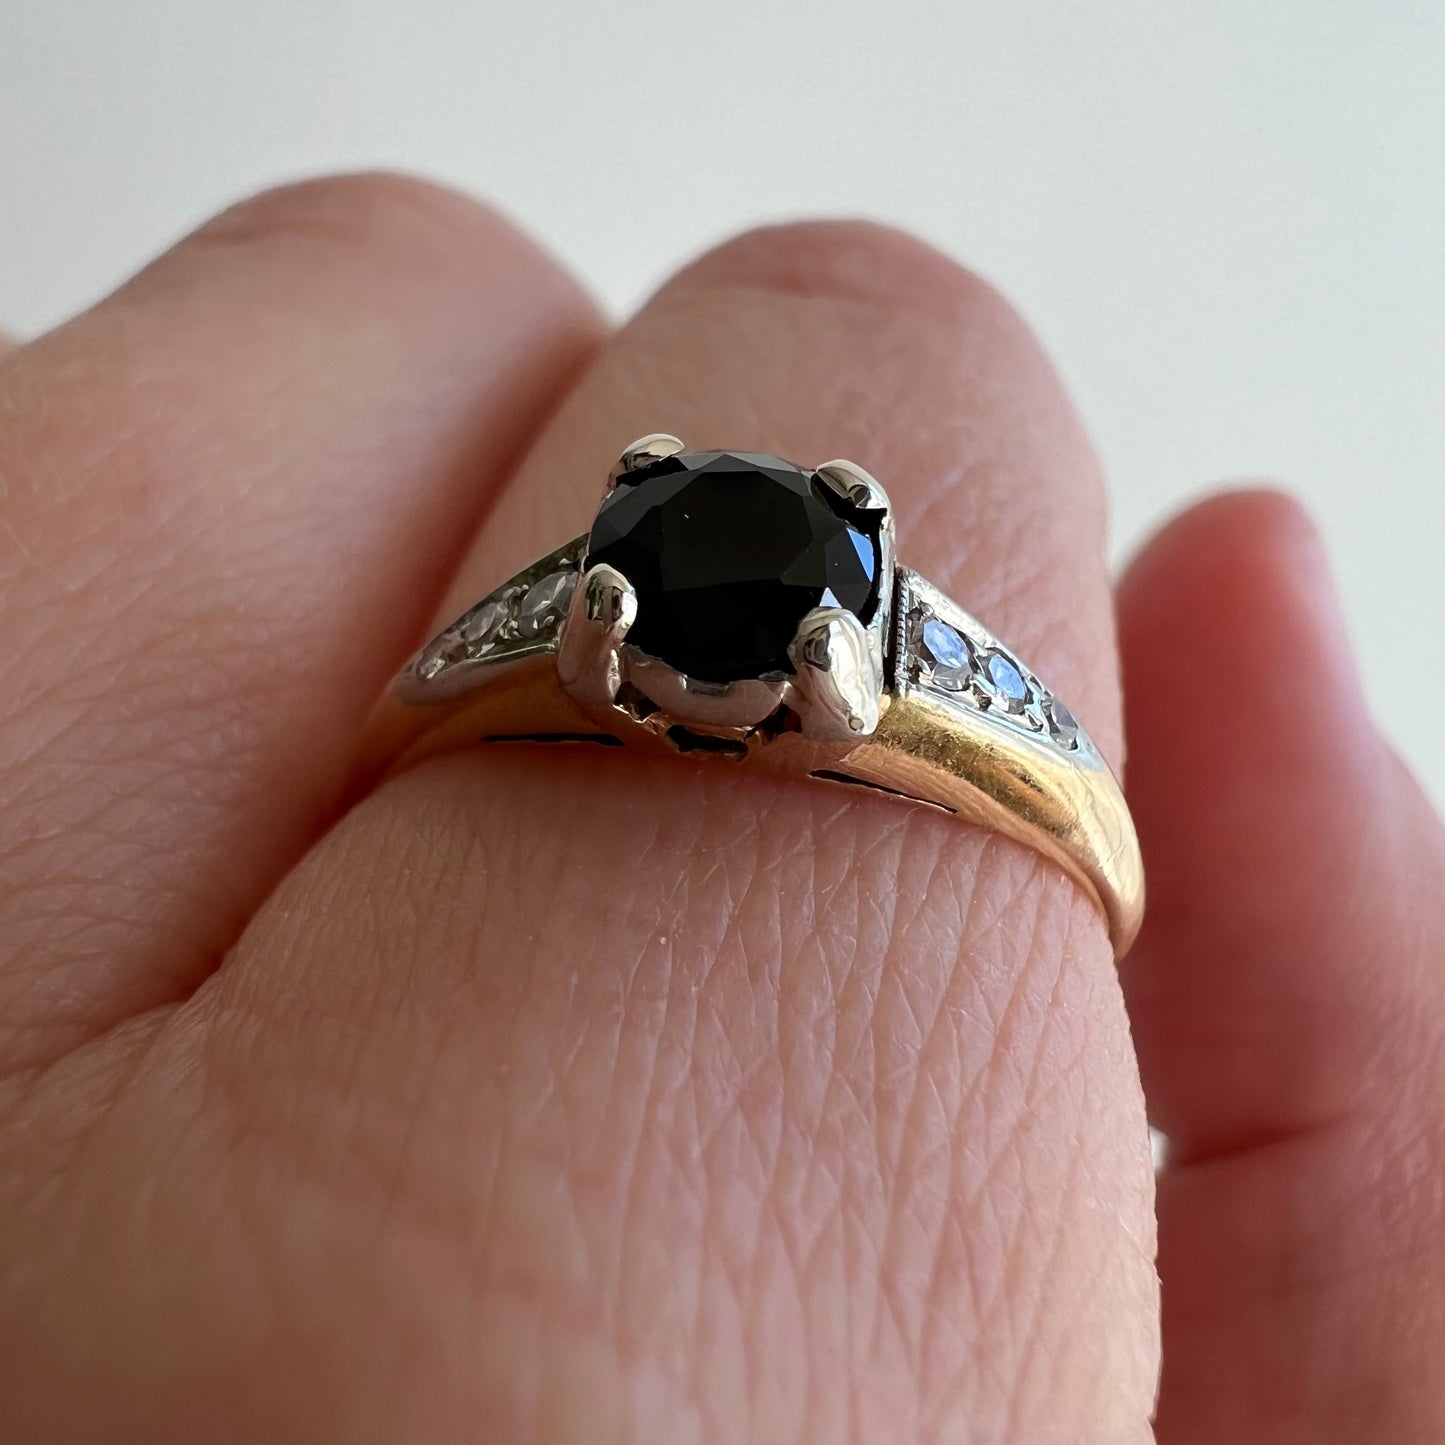 reimagined V I N T A G E // of light and dark / 14k white and yellow gold with onyx and diamonds / size 6